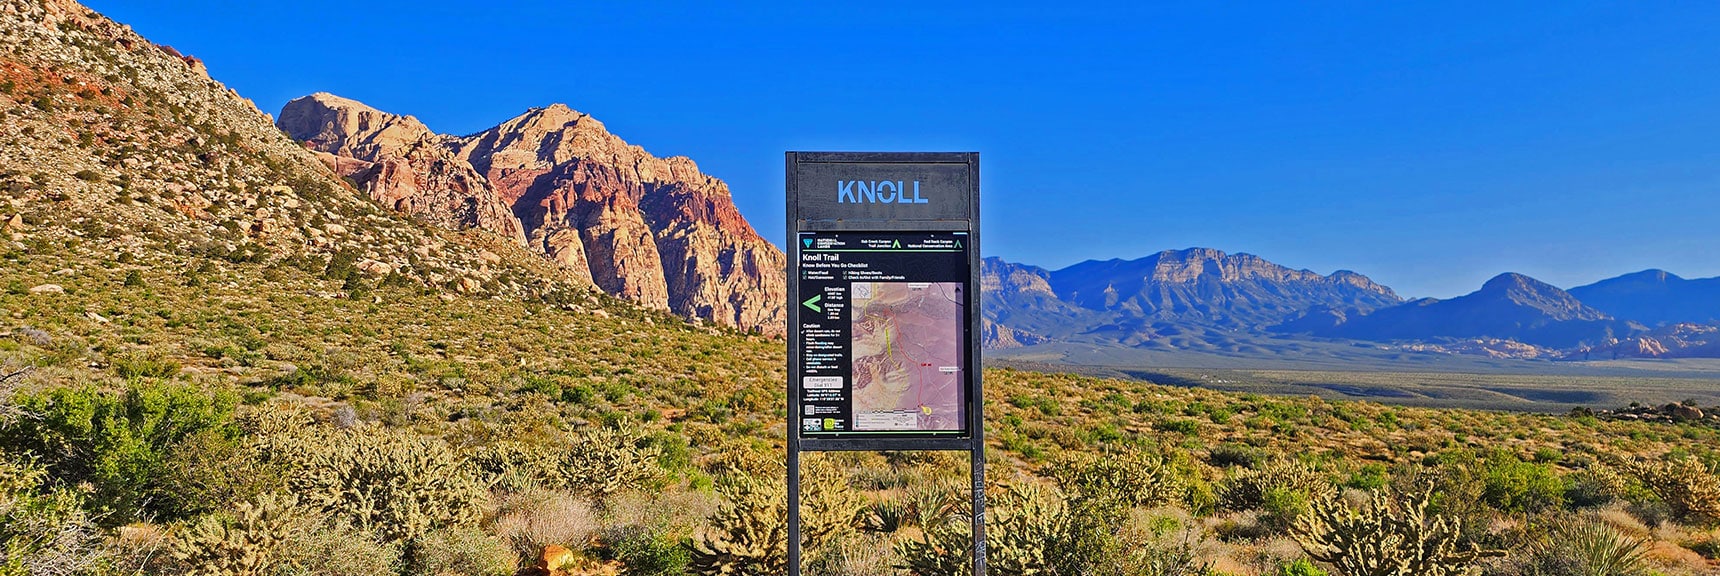 Finally, Starting Out at The Knoll Southern Trailhead. Seldom Traveled Stretch. | Knoll Trail | Red Rock Canyon National Conservation Area, Nevada | David Smith | LasVegasAreaTrails.com